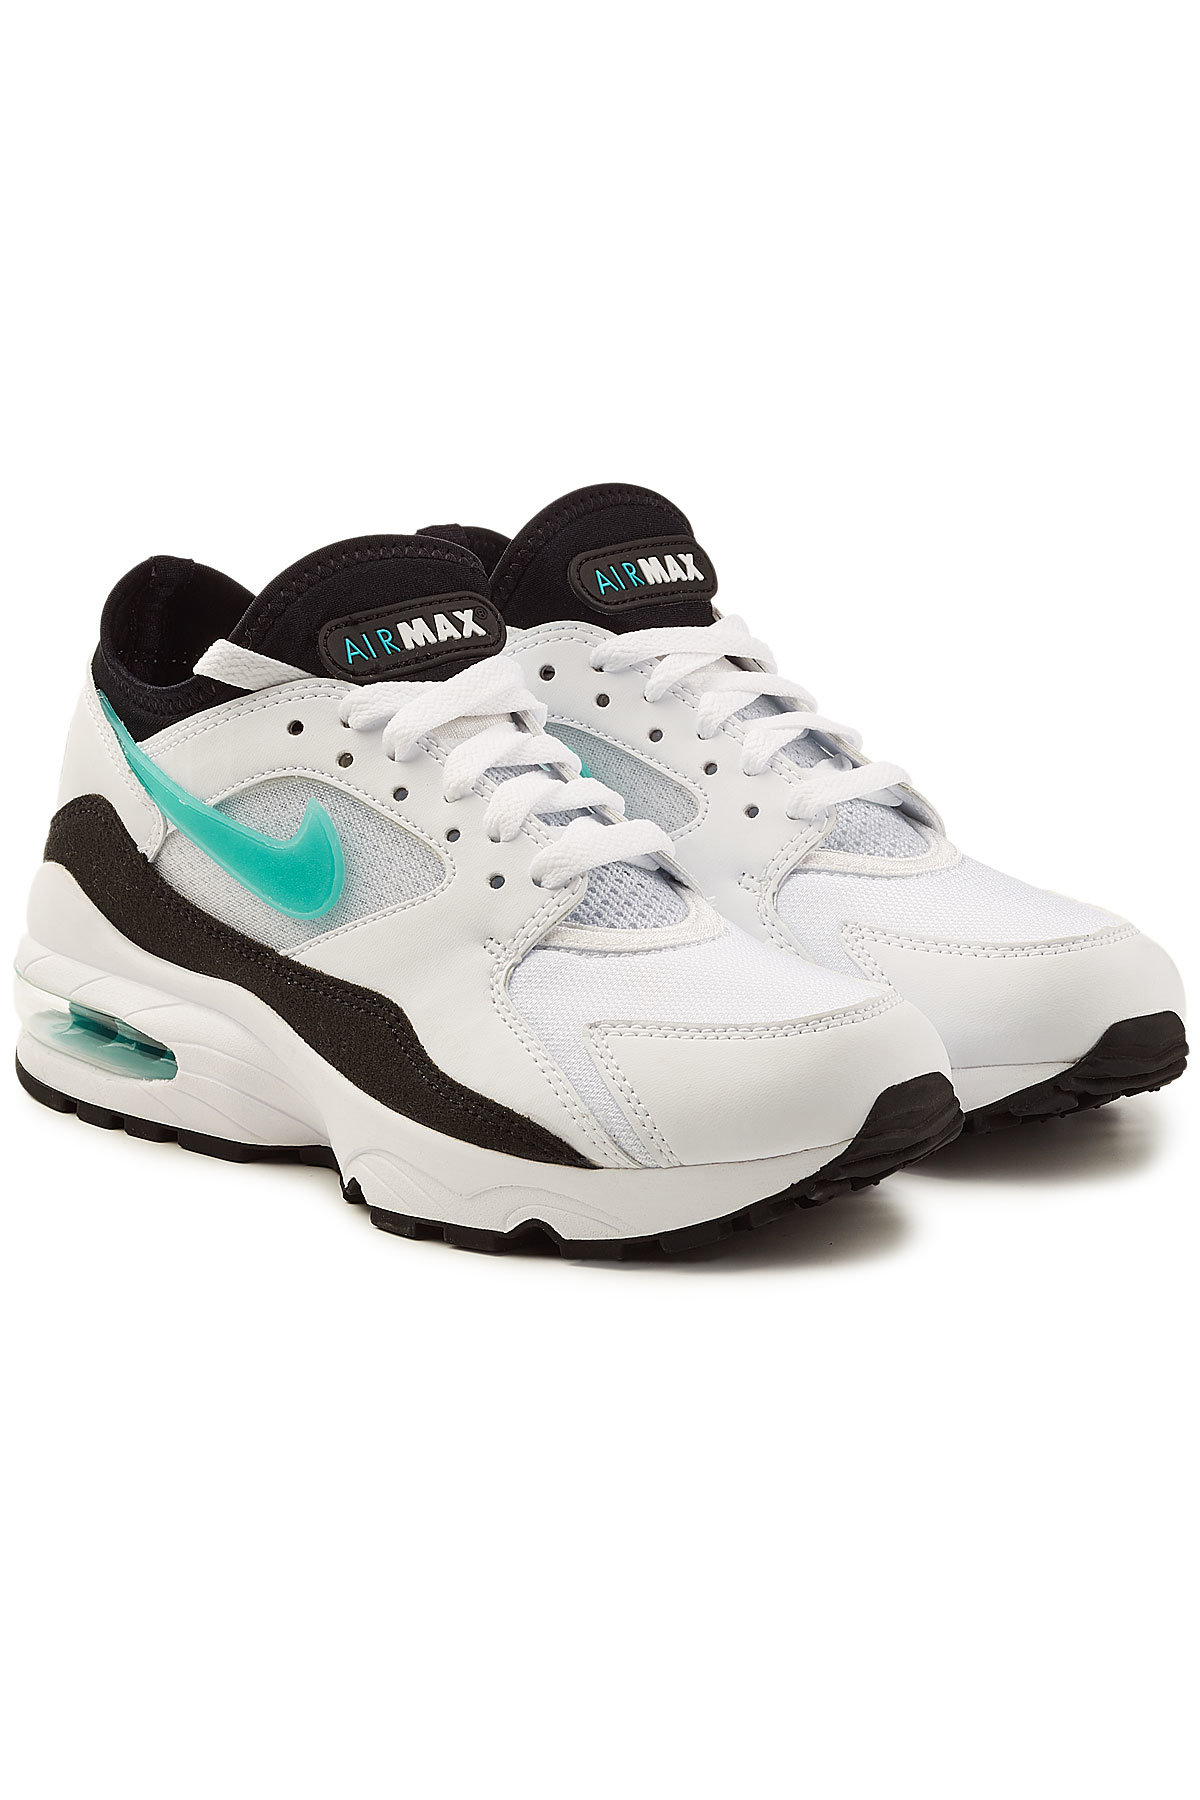 Nike - Air Max '93 Sneakers with Leather